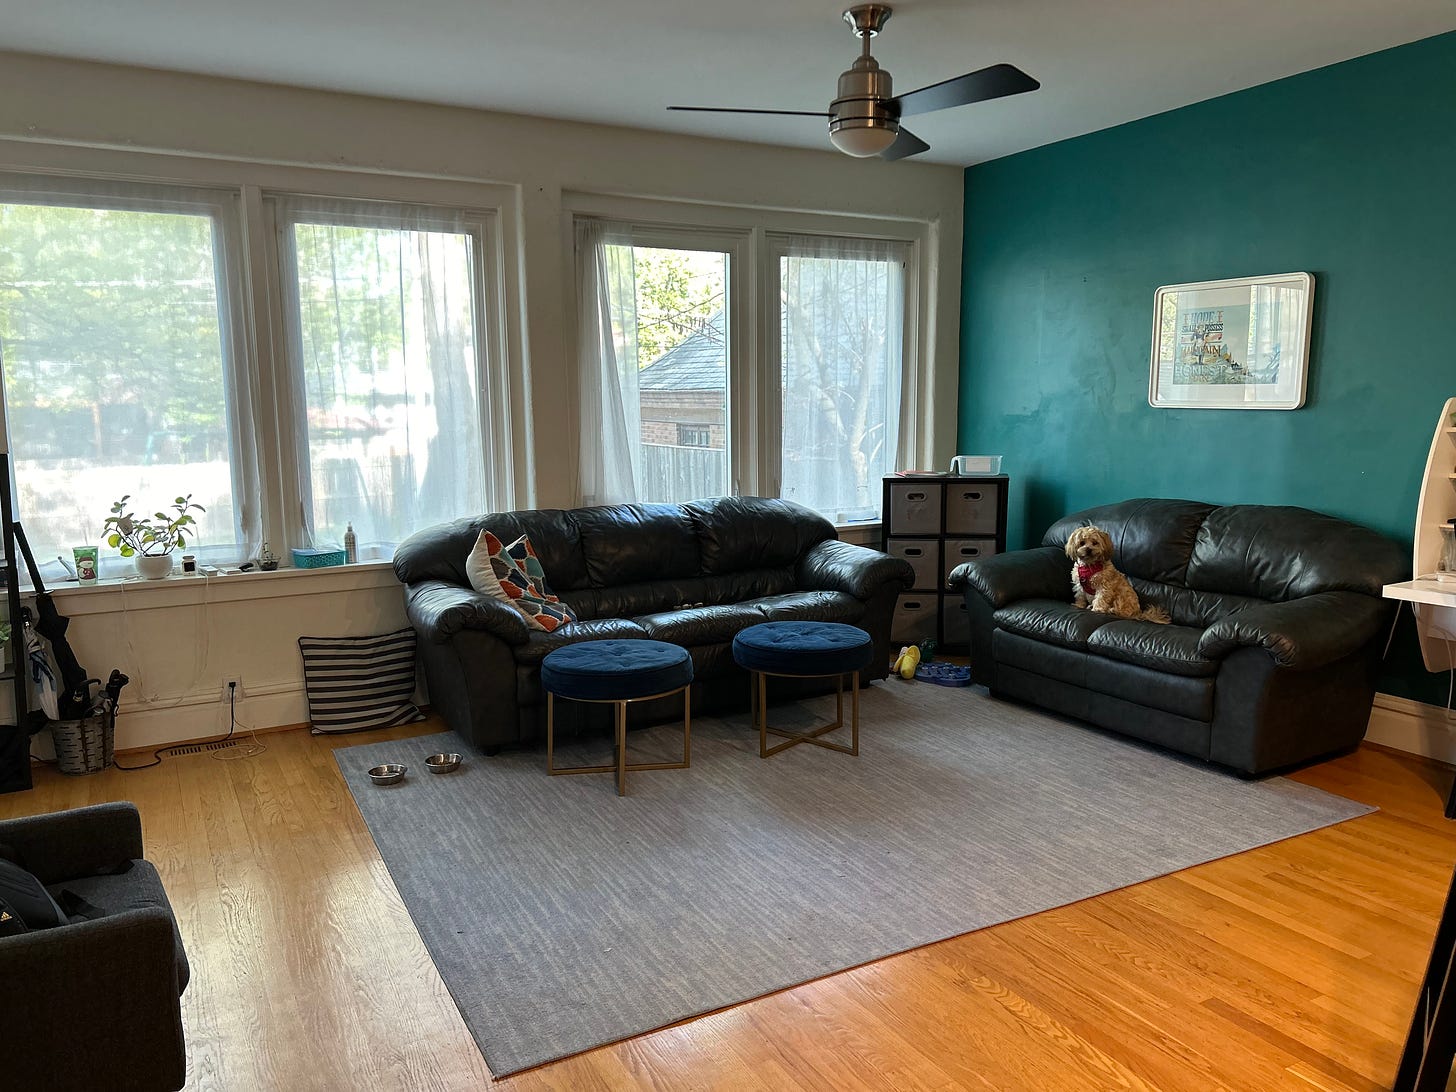 picture of author's living room with couches, rugs, and a dog